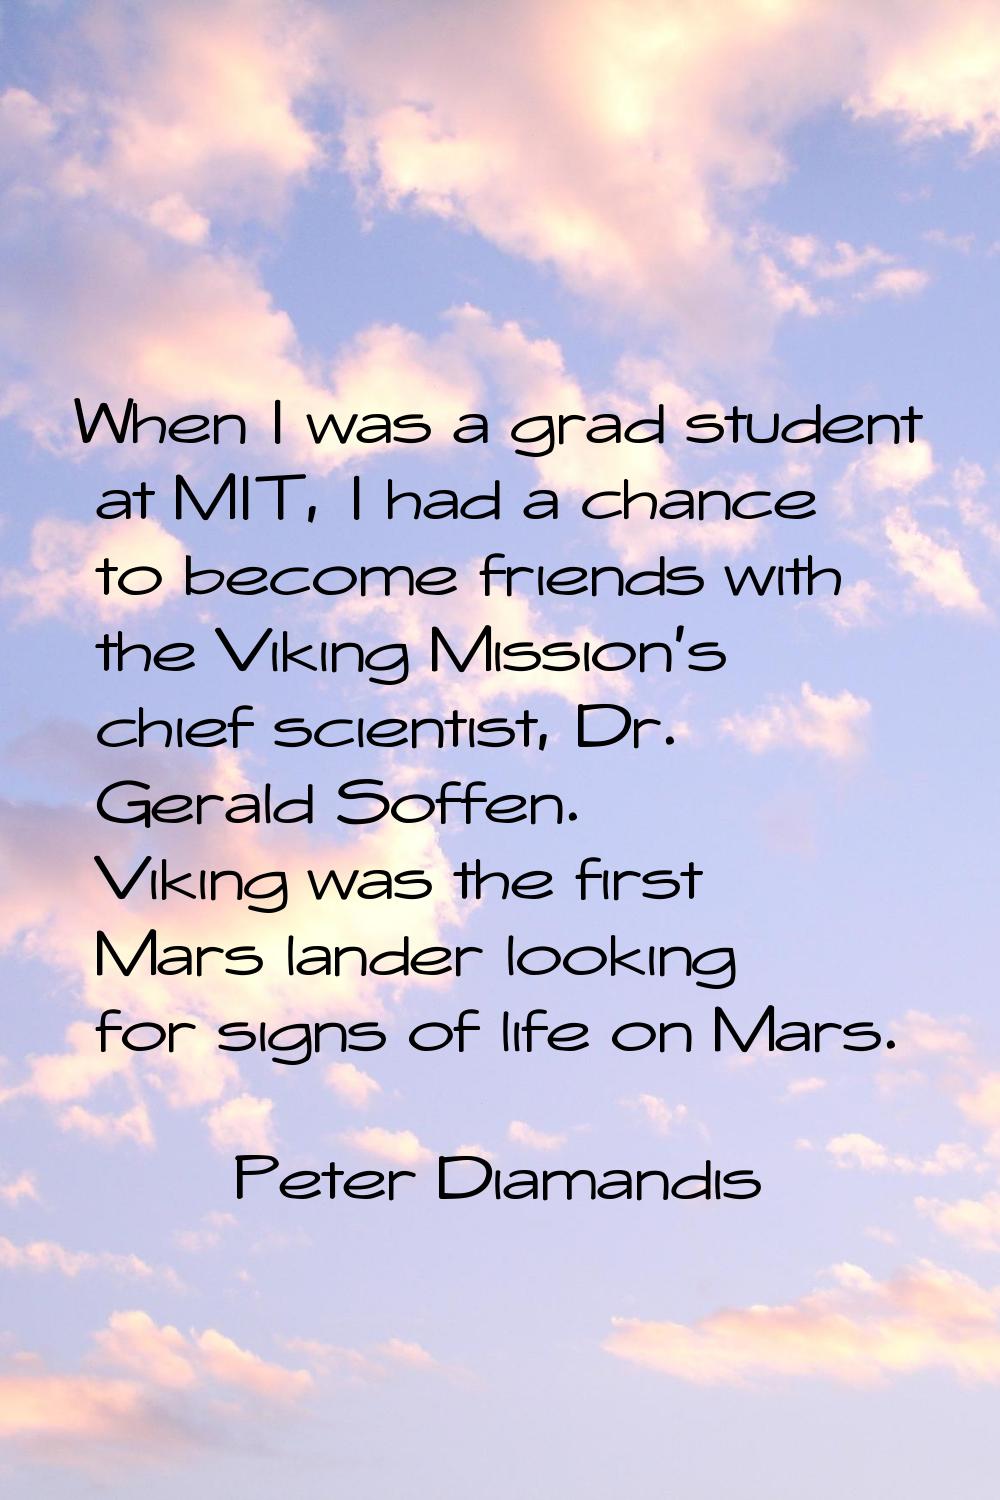 When I was a grad student at MIT, I had a chance to become friends with the Viking Mission's chief 